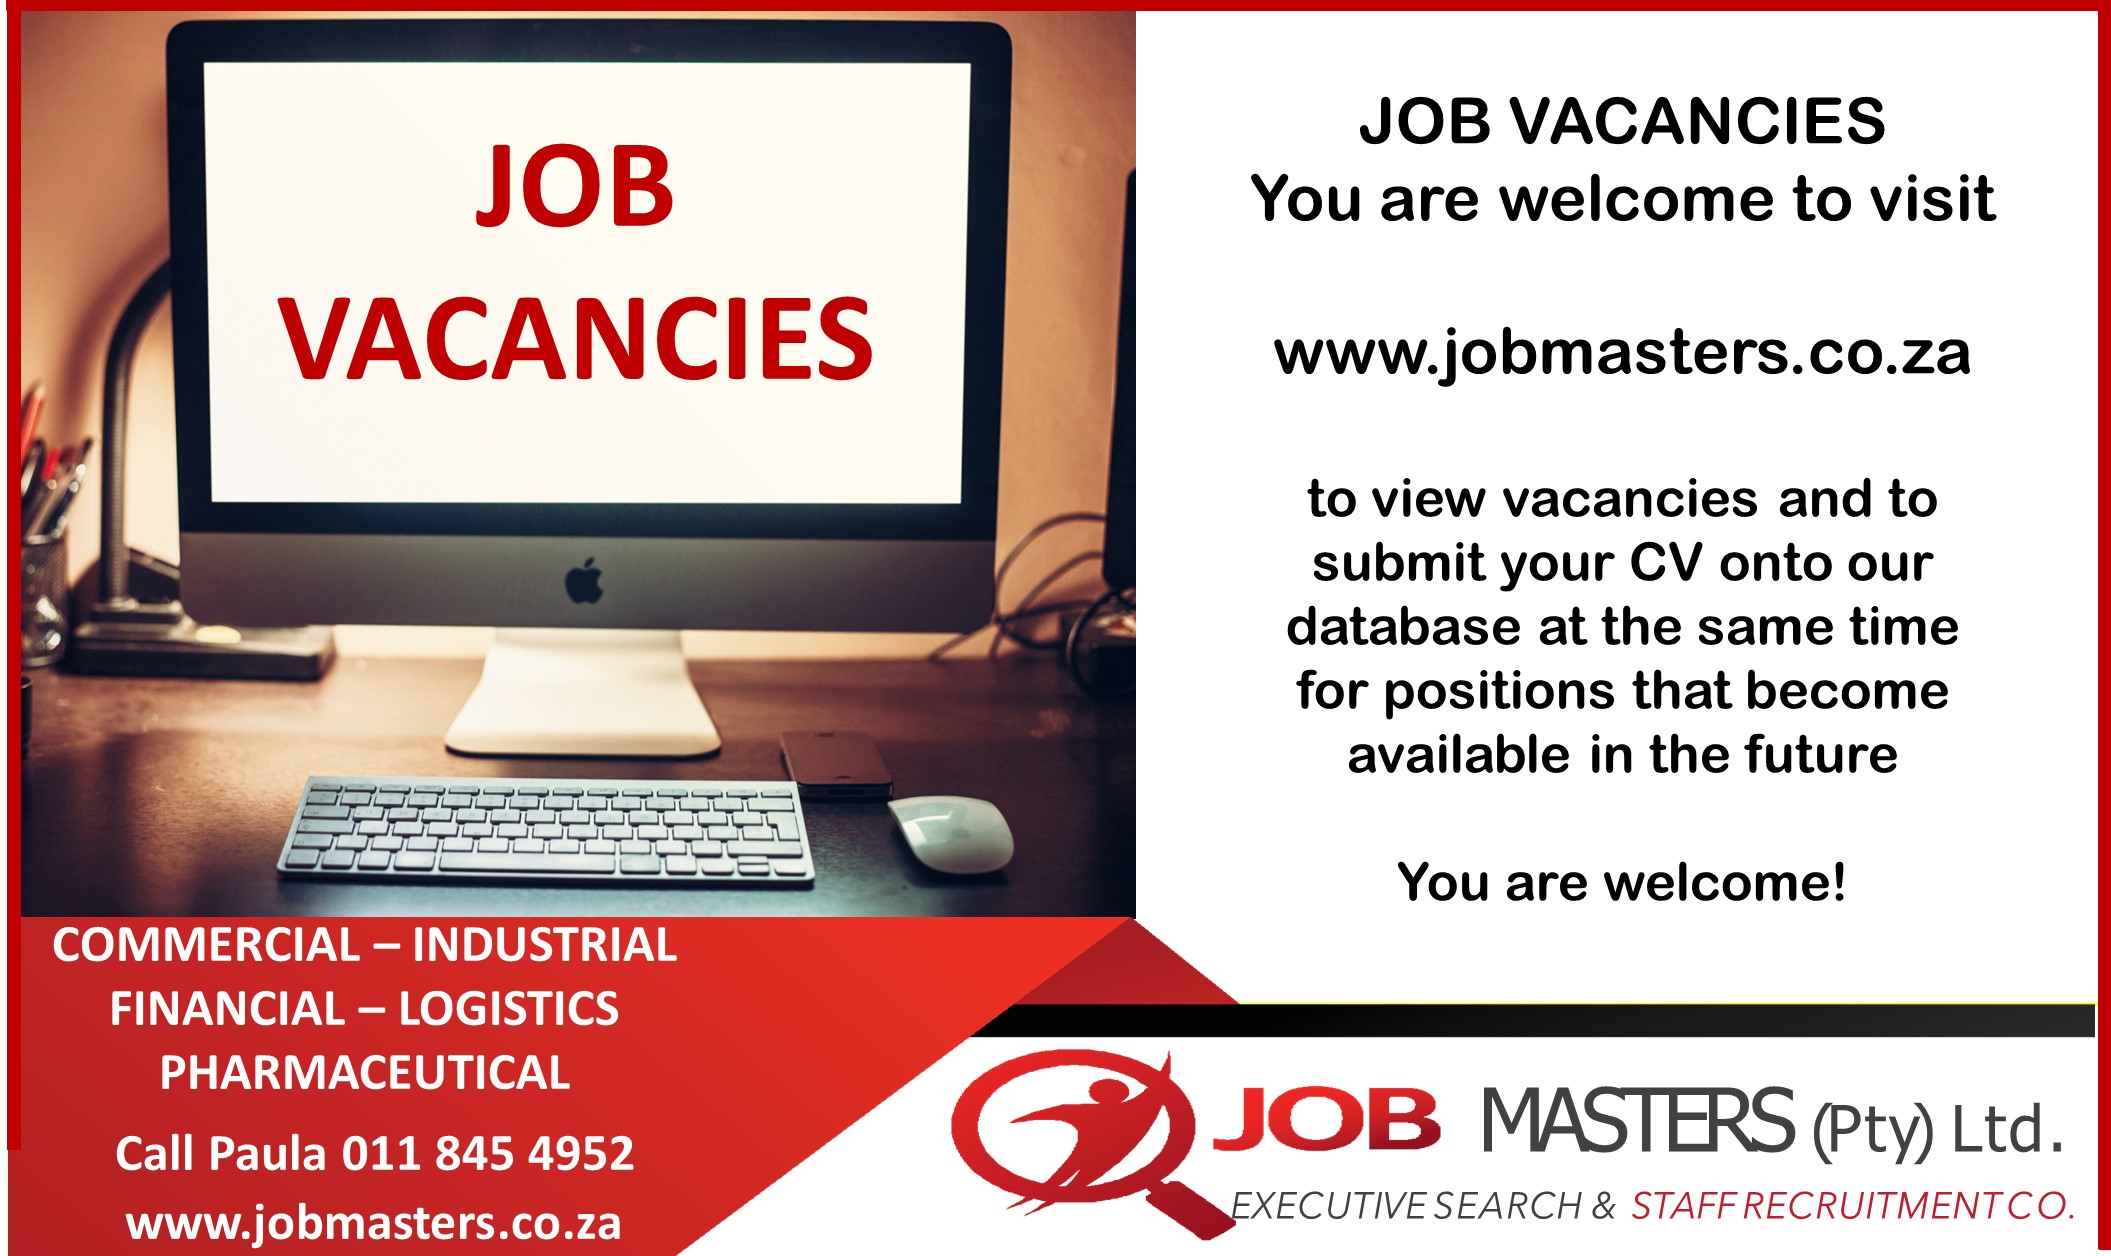 JOB
VACANCIES

COMMERCIAL — INDUSTRIAL
FINANCIAL —- LOGISTICS
PHARMACEUTICAL
Call Paula 011 845 4952
www.jobmasters.co.za

JOB VACANCIES
You are welcome to visit

www.jobmasters.co.za

to view vacancies and to
submit your CV onto our
database at the same time
for positions that become
available in the future

You are welcome!

JOB MASTERS (pty) Ltd.

 

XECUTIVE SEARCH & STAFFRECRUITMENTCO.